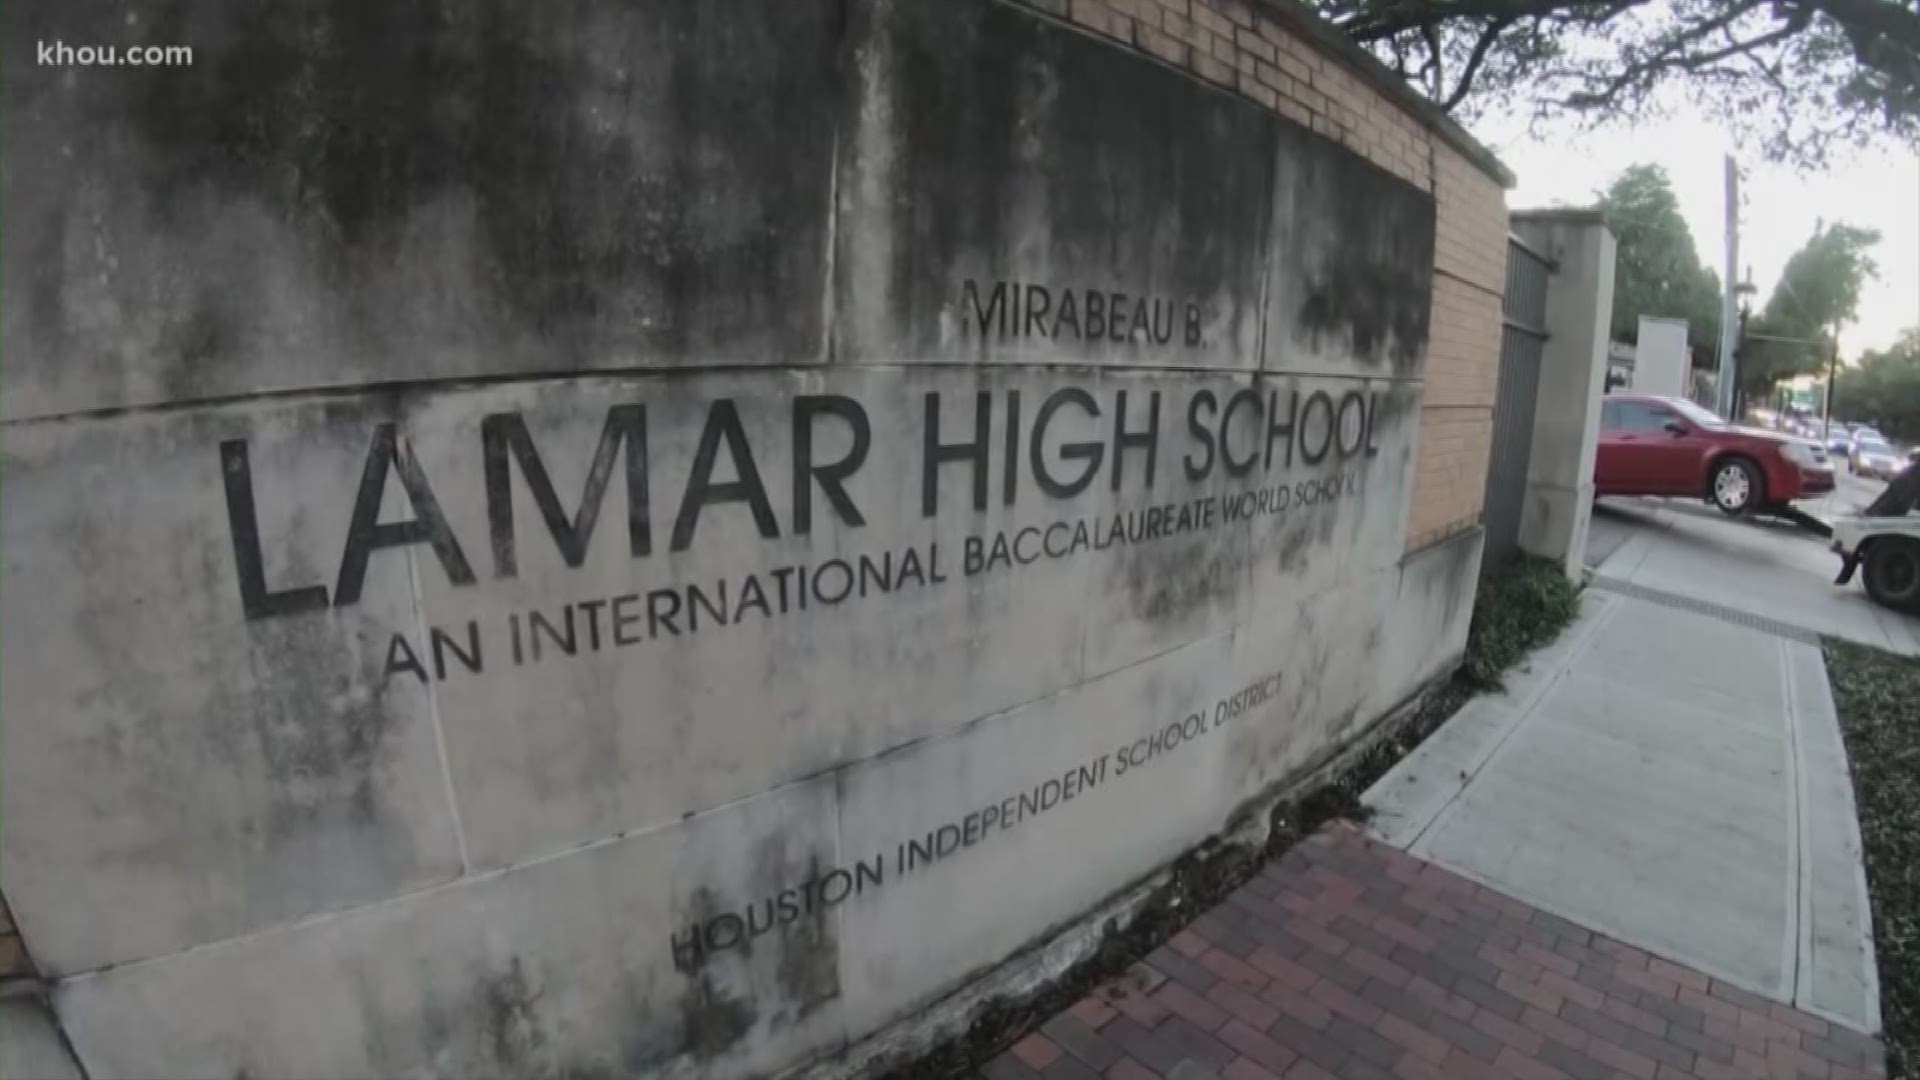 Students at Lamar High School say a recent lock-down, put in place after an 18-year-old student was shot and killed a block away, caused chaos and confusion among students.